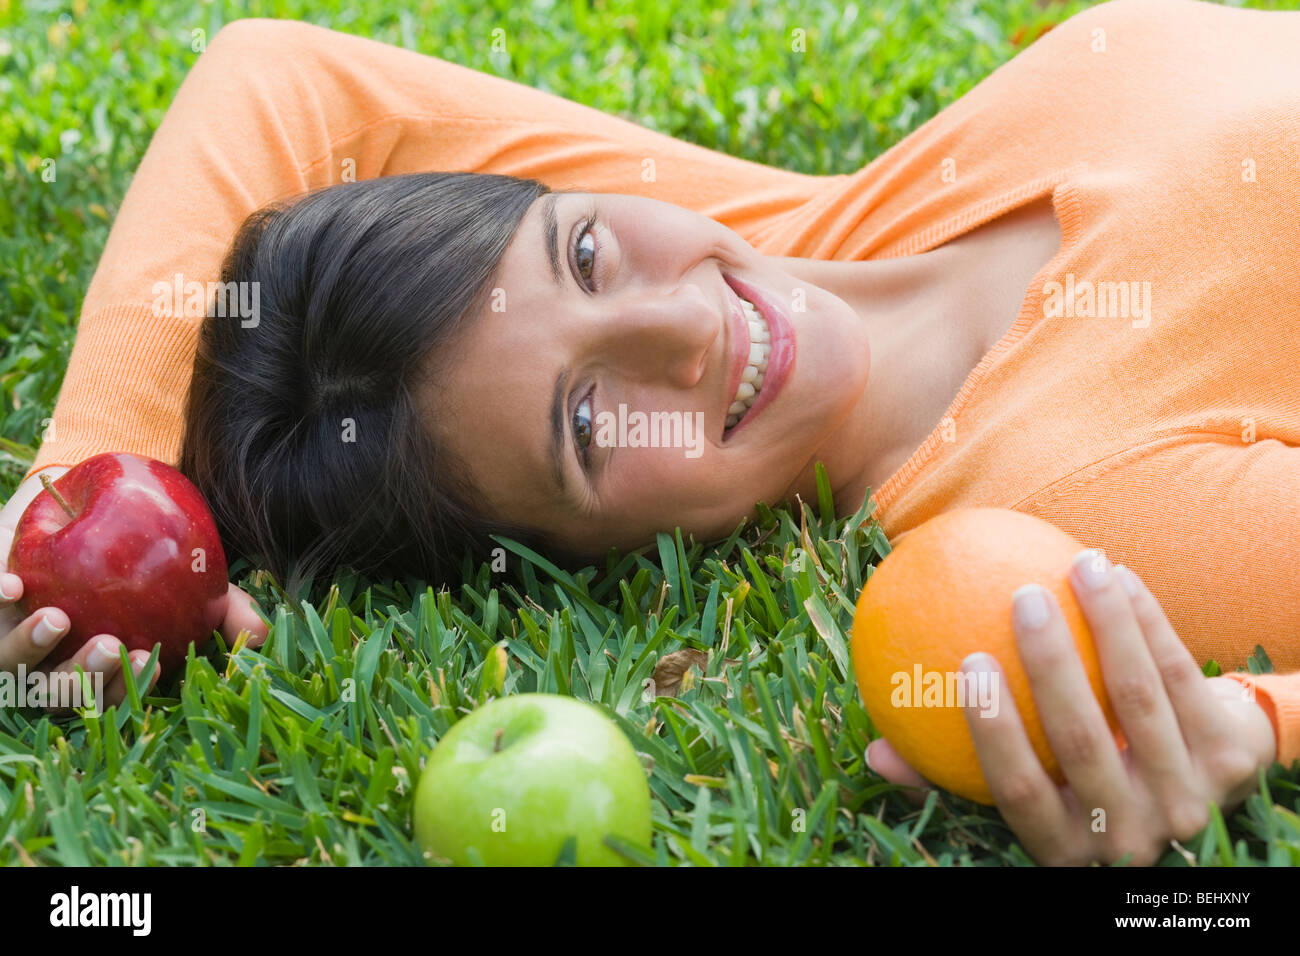 Teenage girl lying on grass and holding fruits Stock Photo